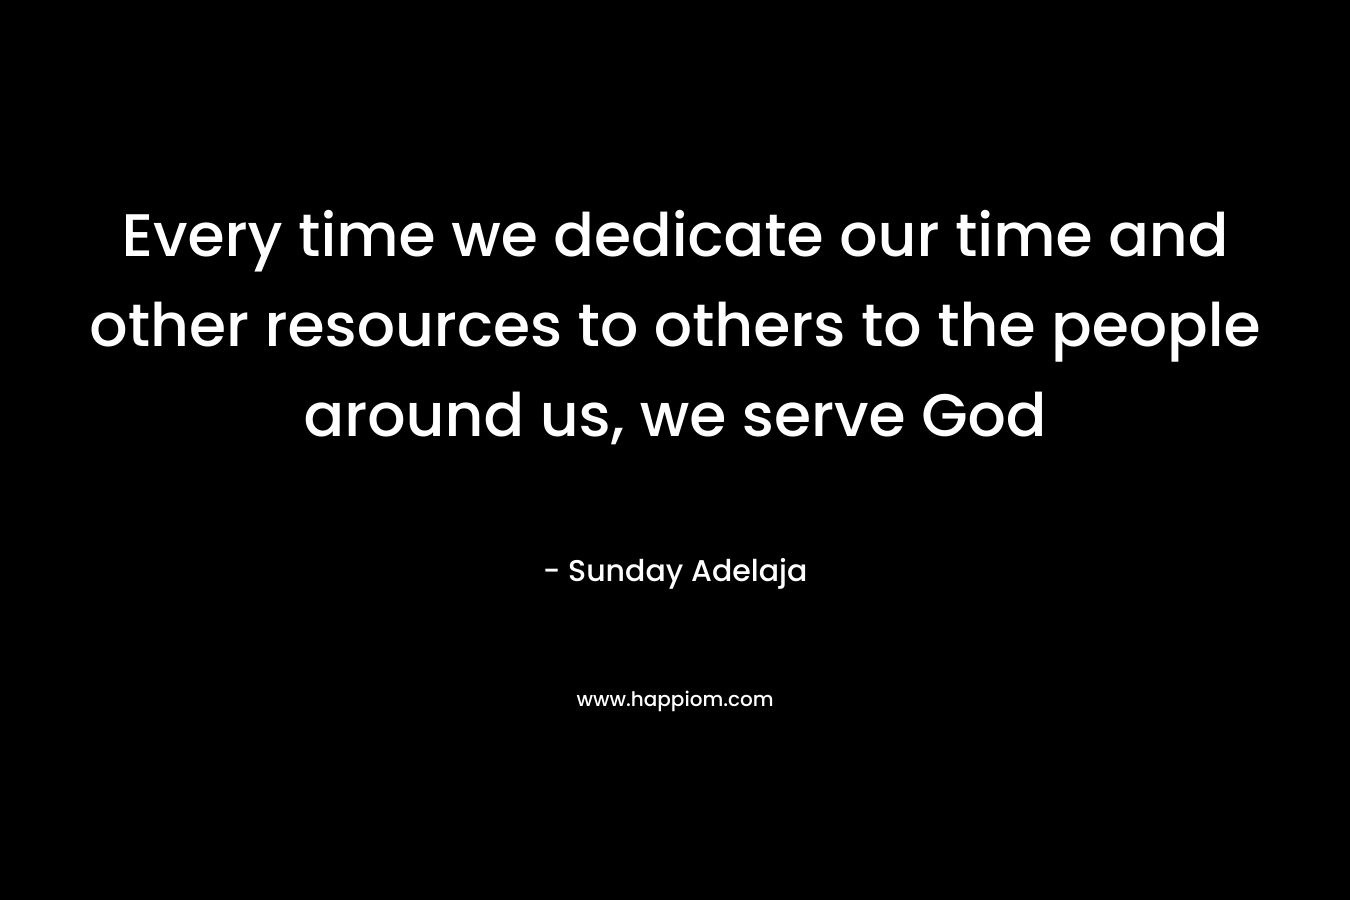 Every time we dedicate our time and other resources to others to the people around us, we serve God